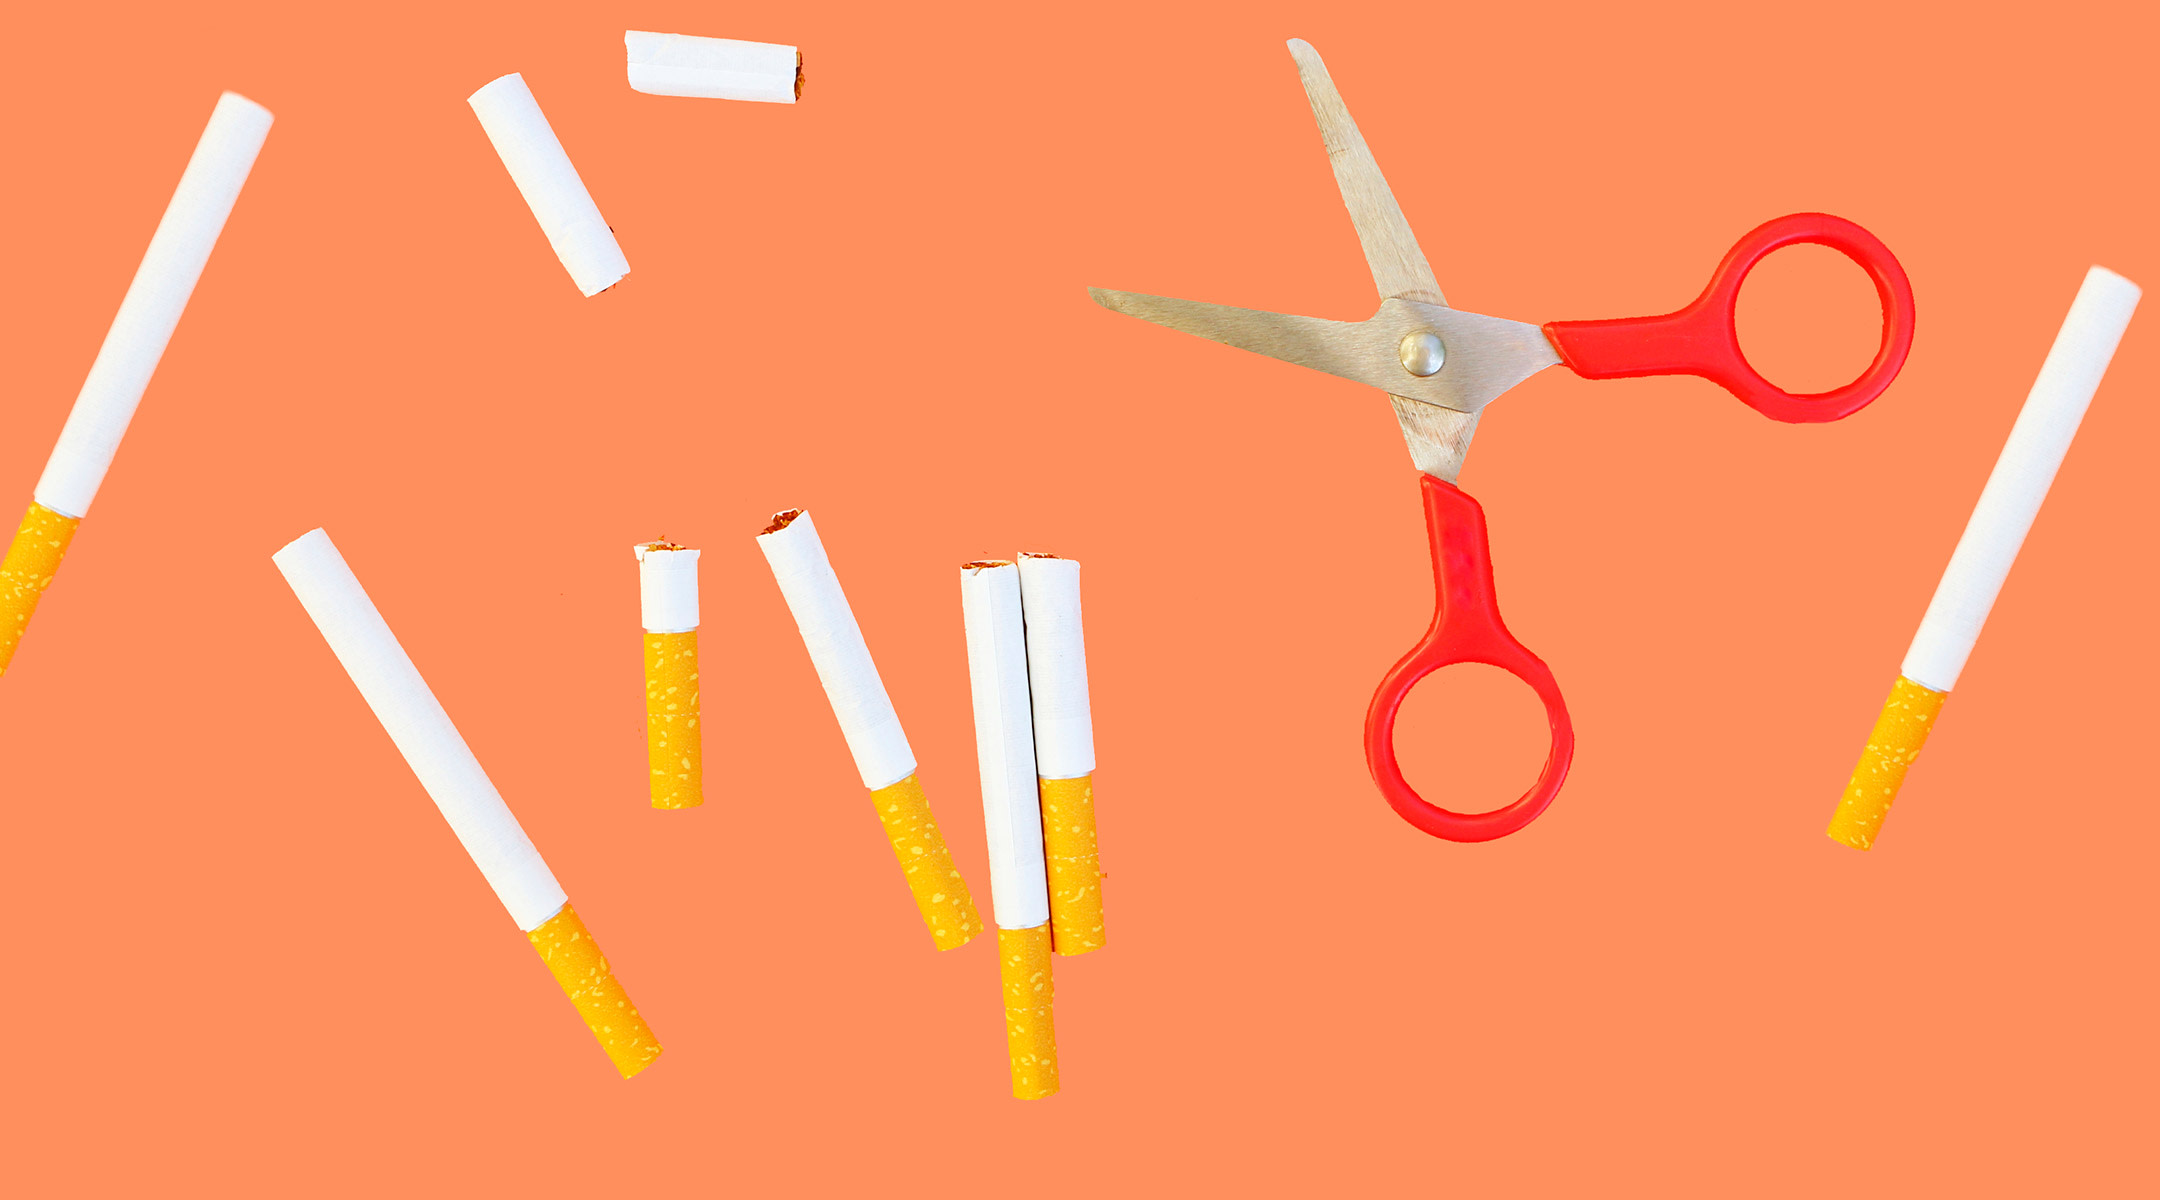 illustration of cigarettes with scissors to represent quitting smoking